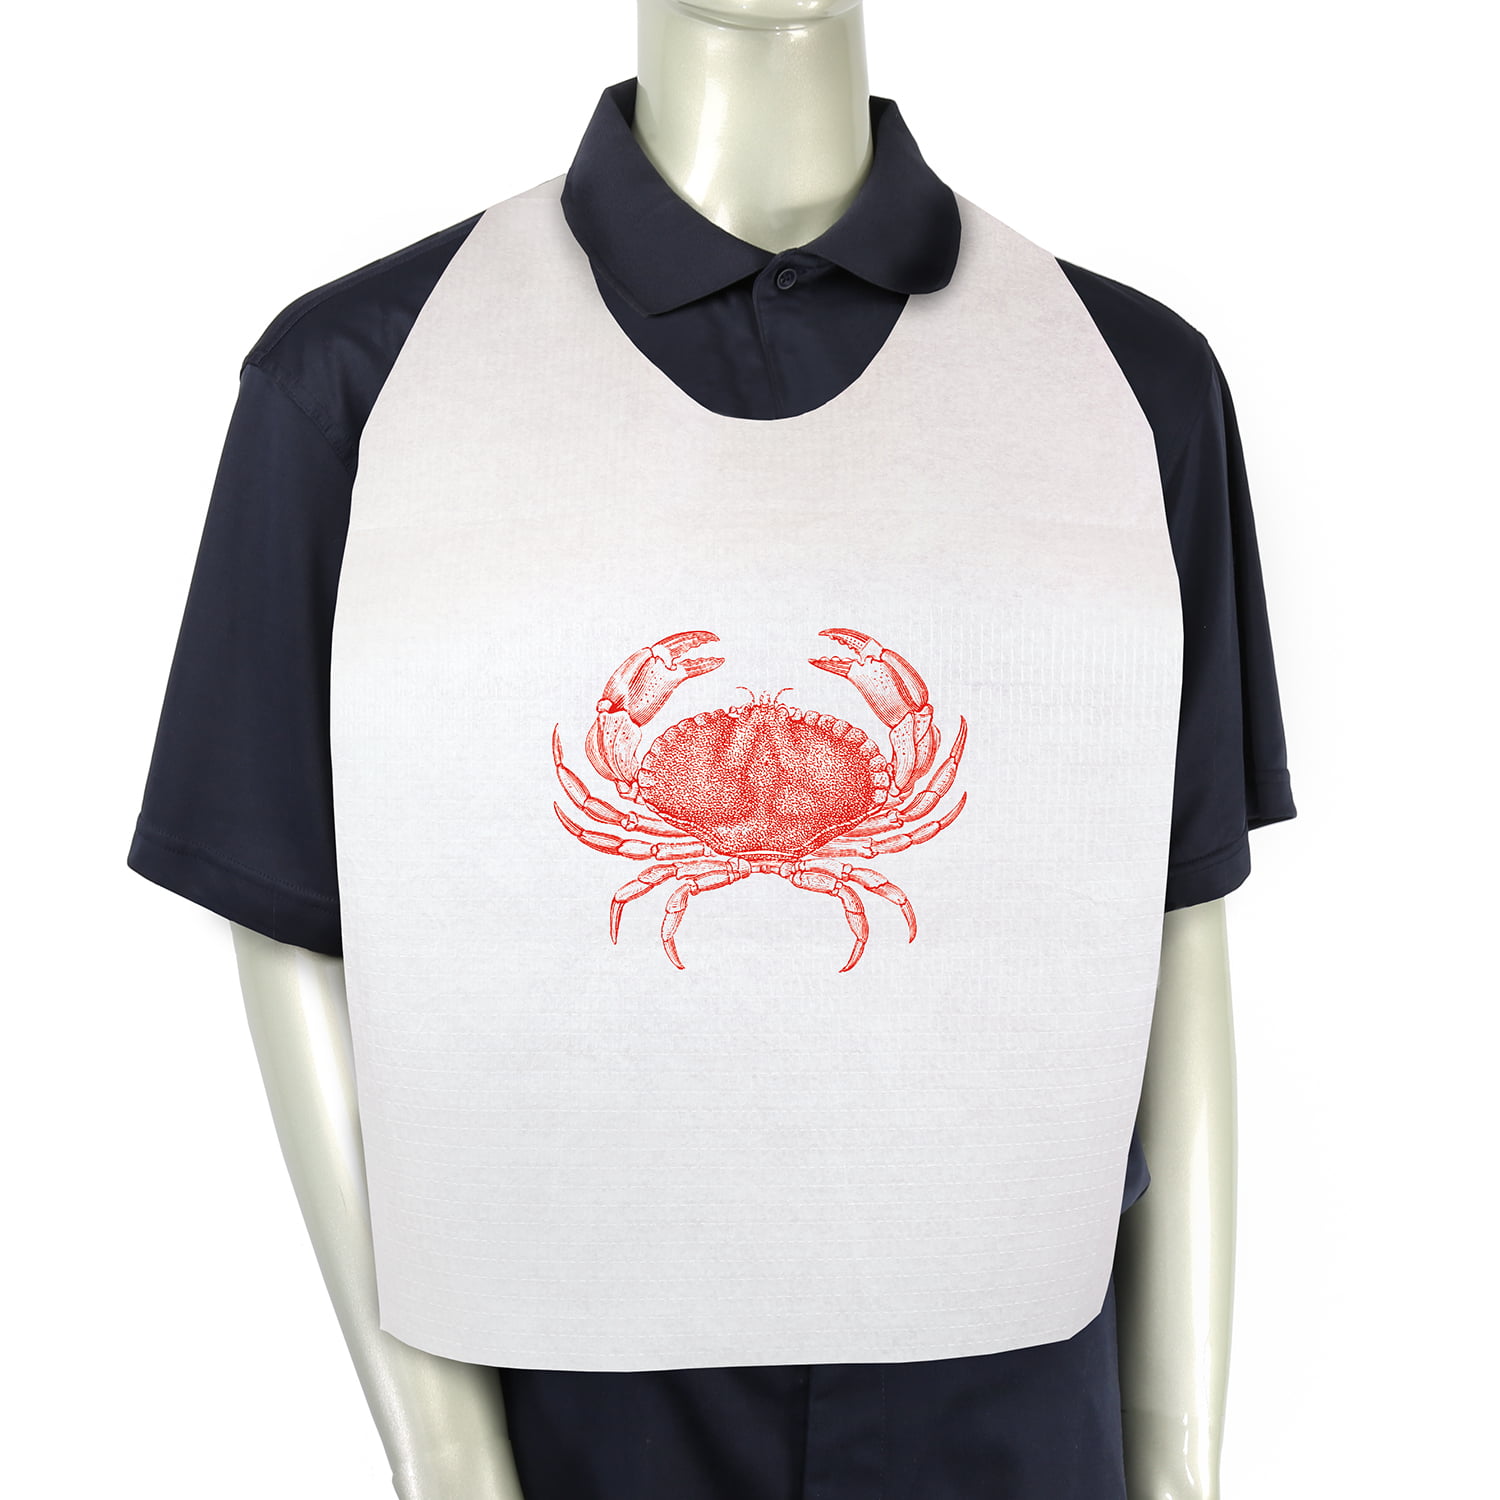 CASE OF 500 DISPOSABLE PLASTIC CRAB BIBS FREE SHIPPING 